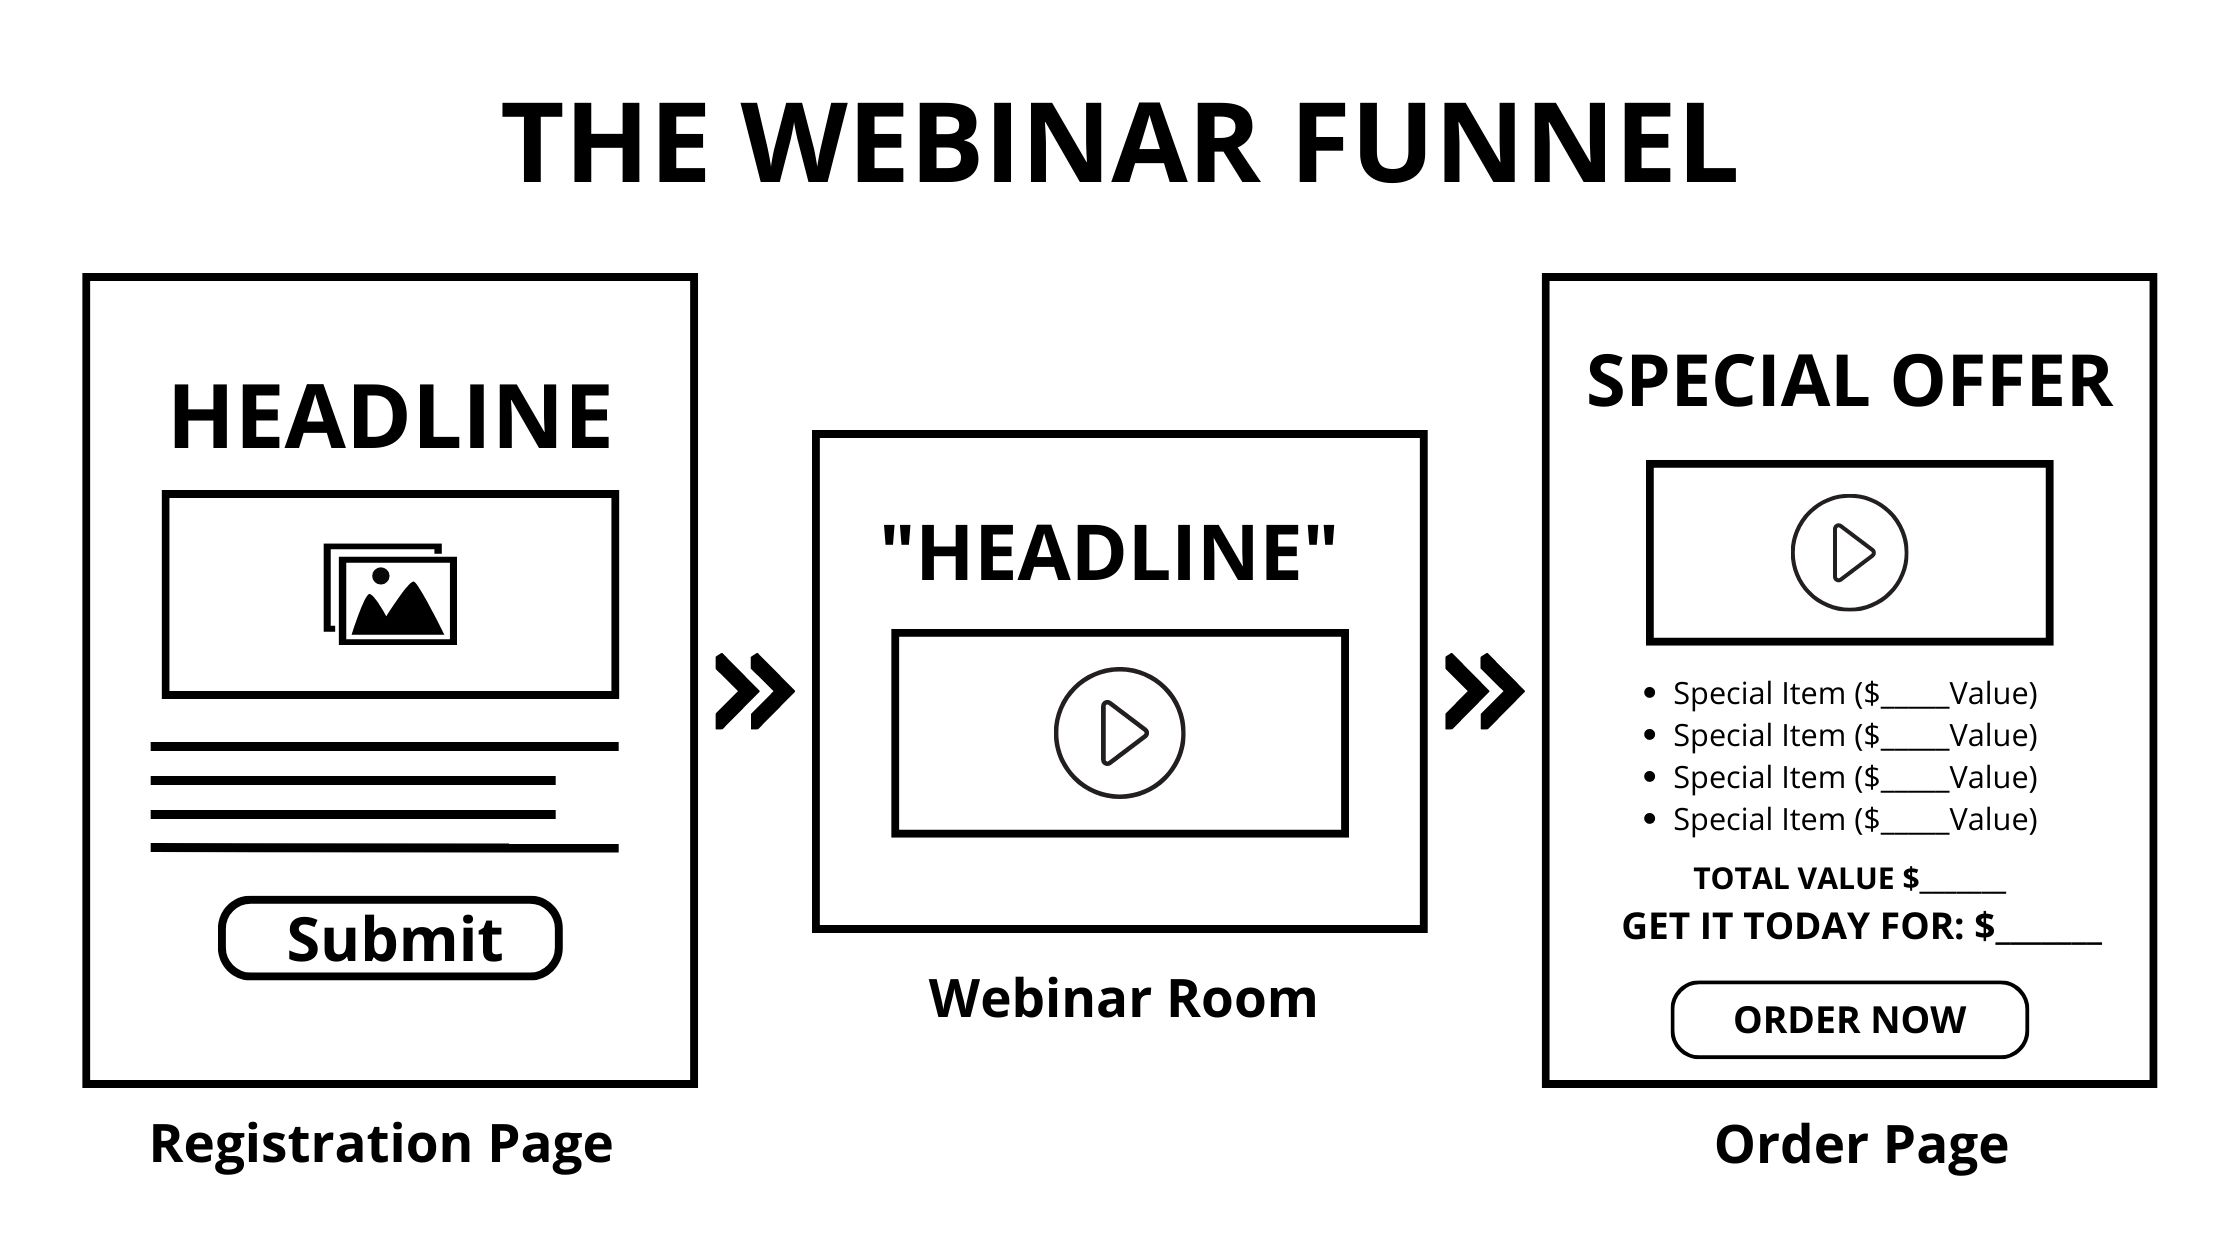 The webinar funnel infographic